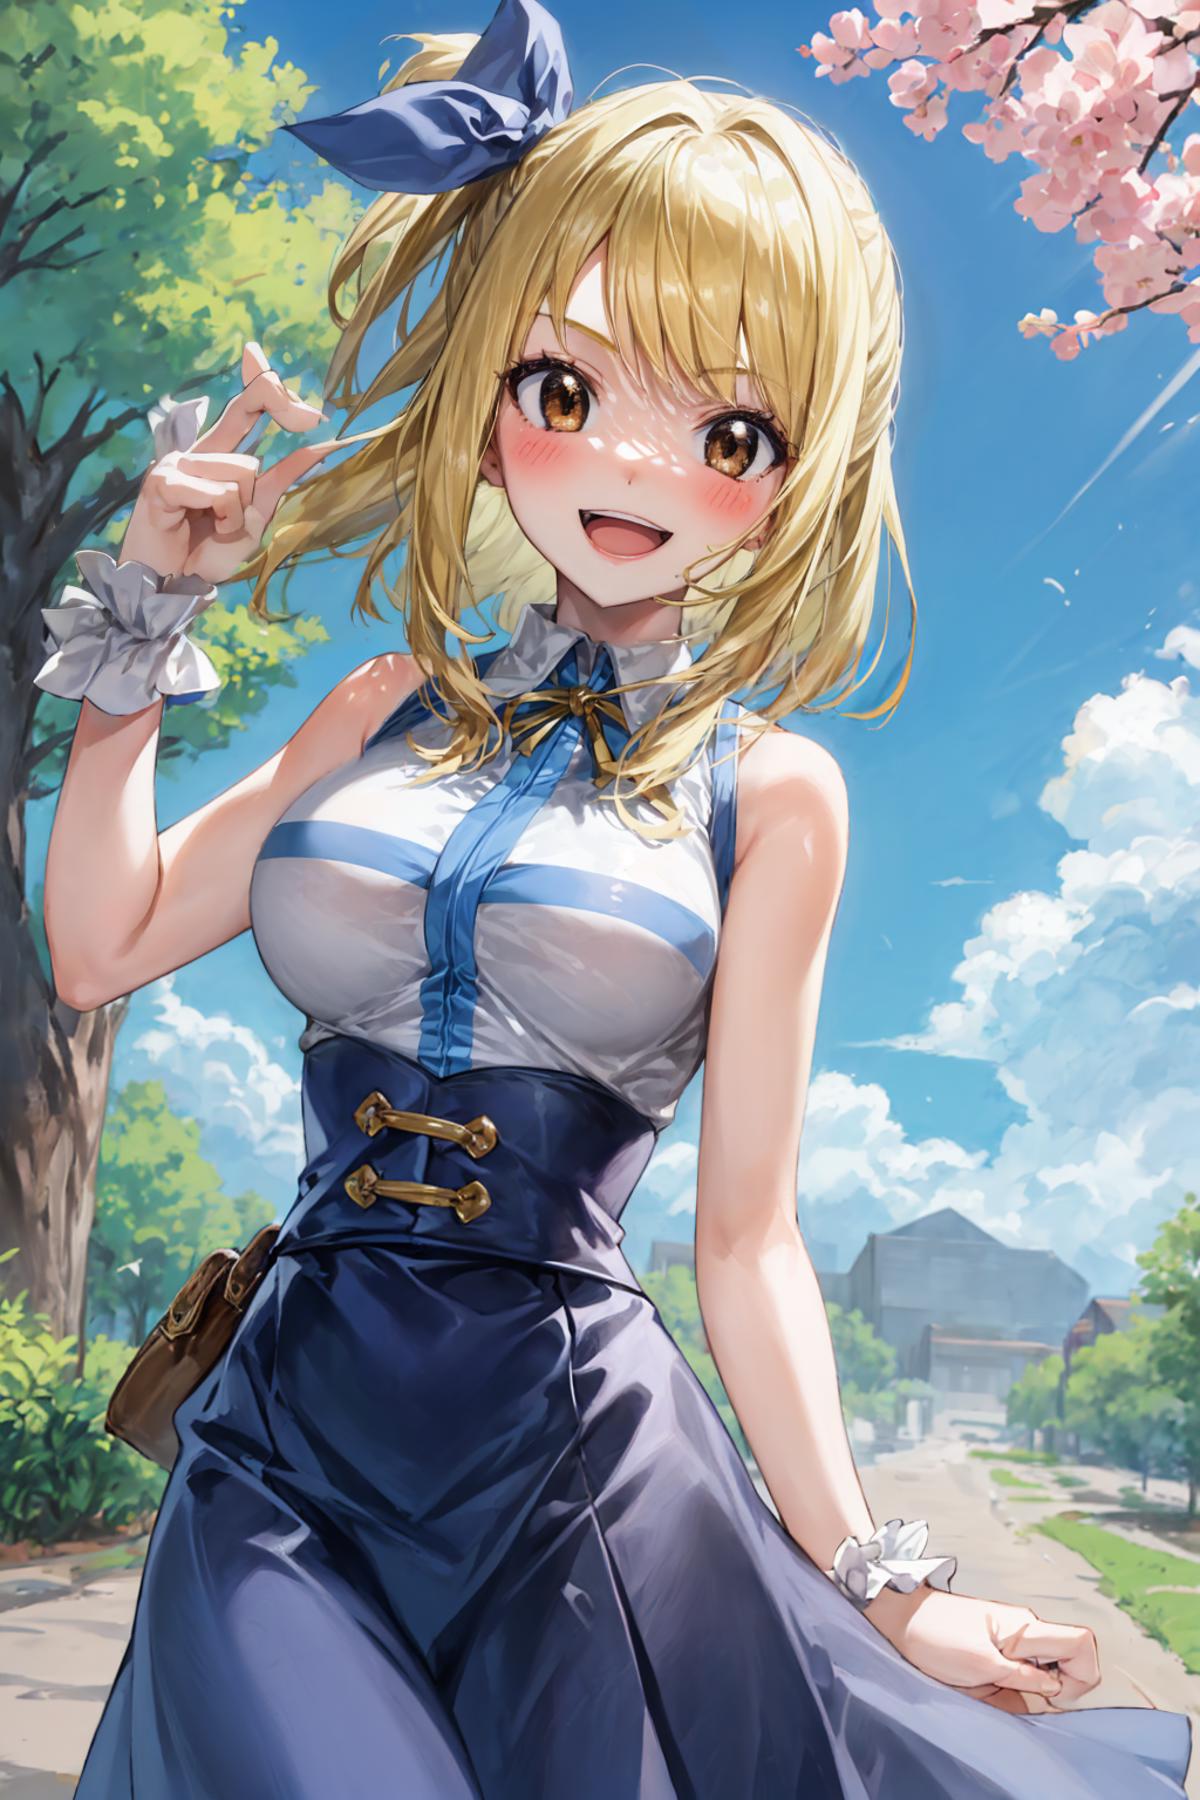 Lucy Heartfilia ルーシィ・ハートフィリア / Fairy Tail image by neilarmstron12